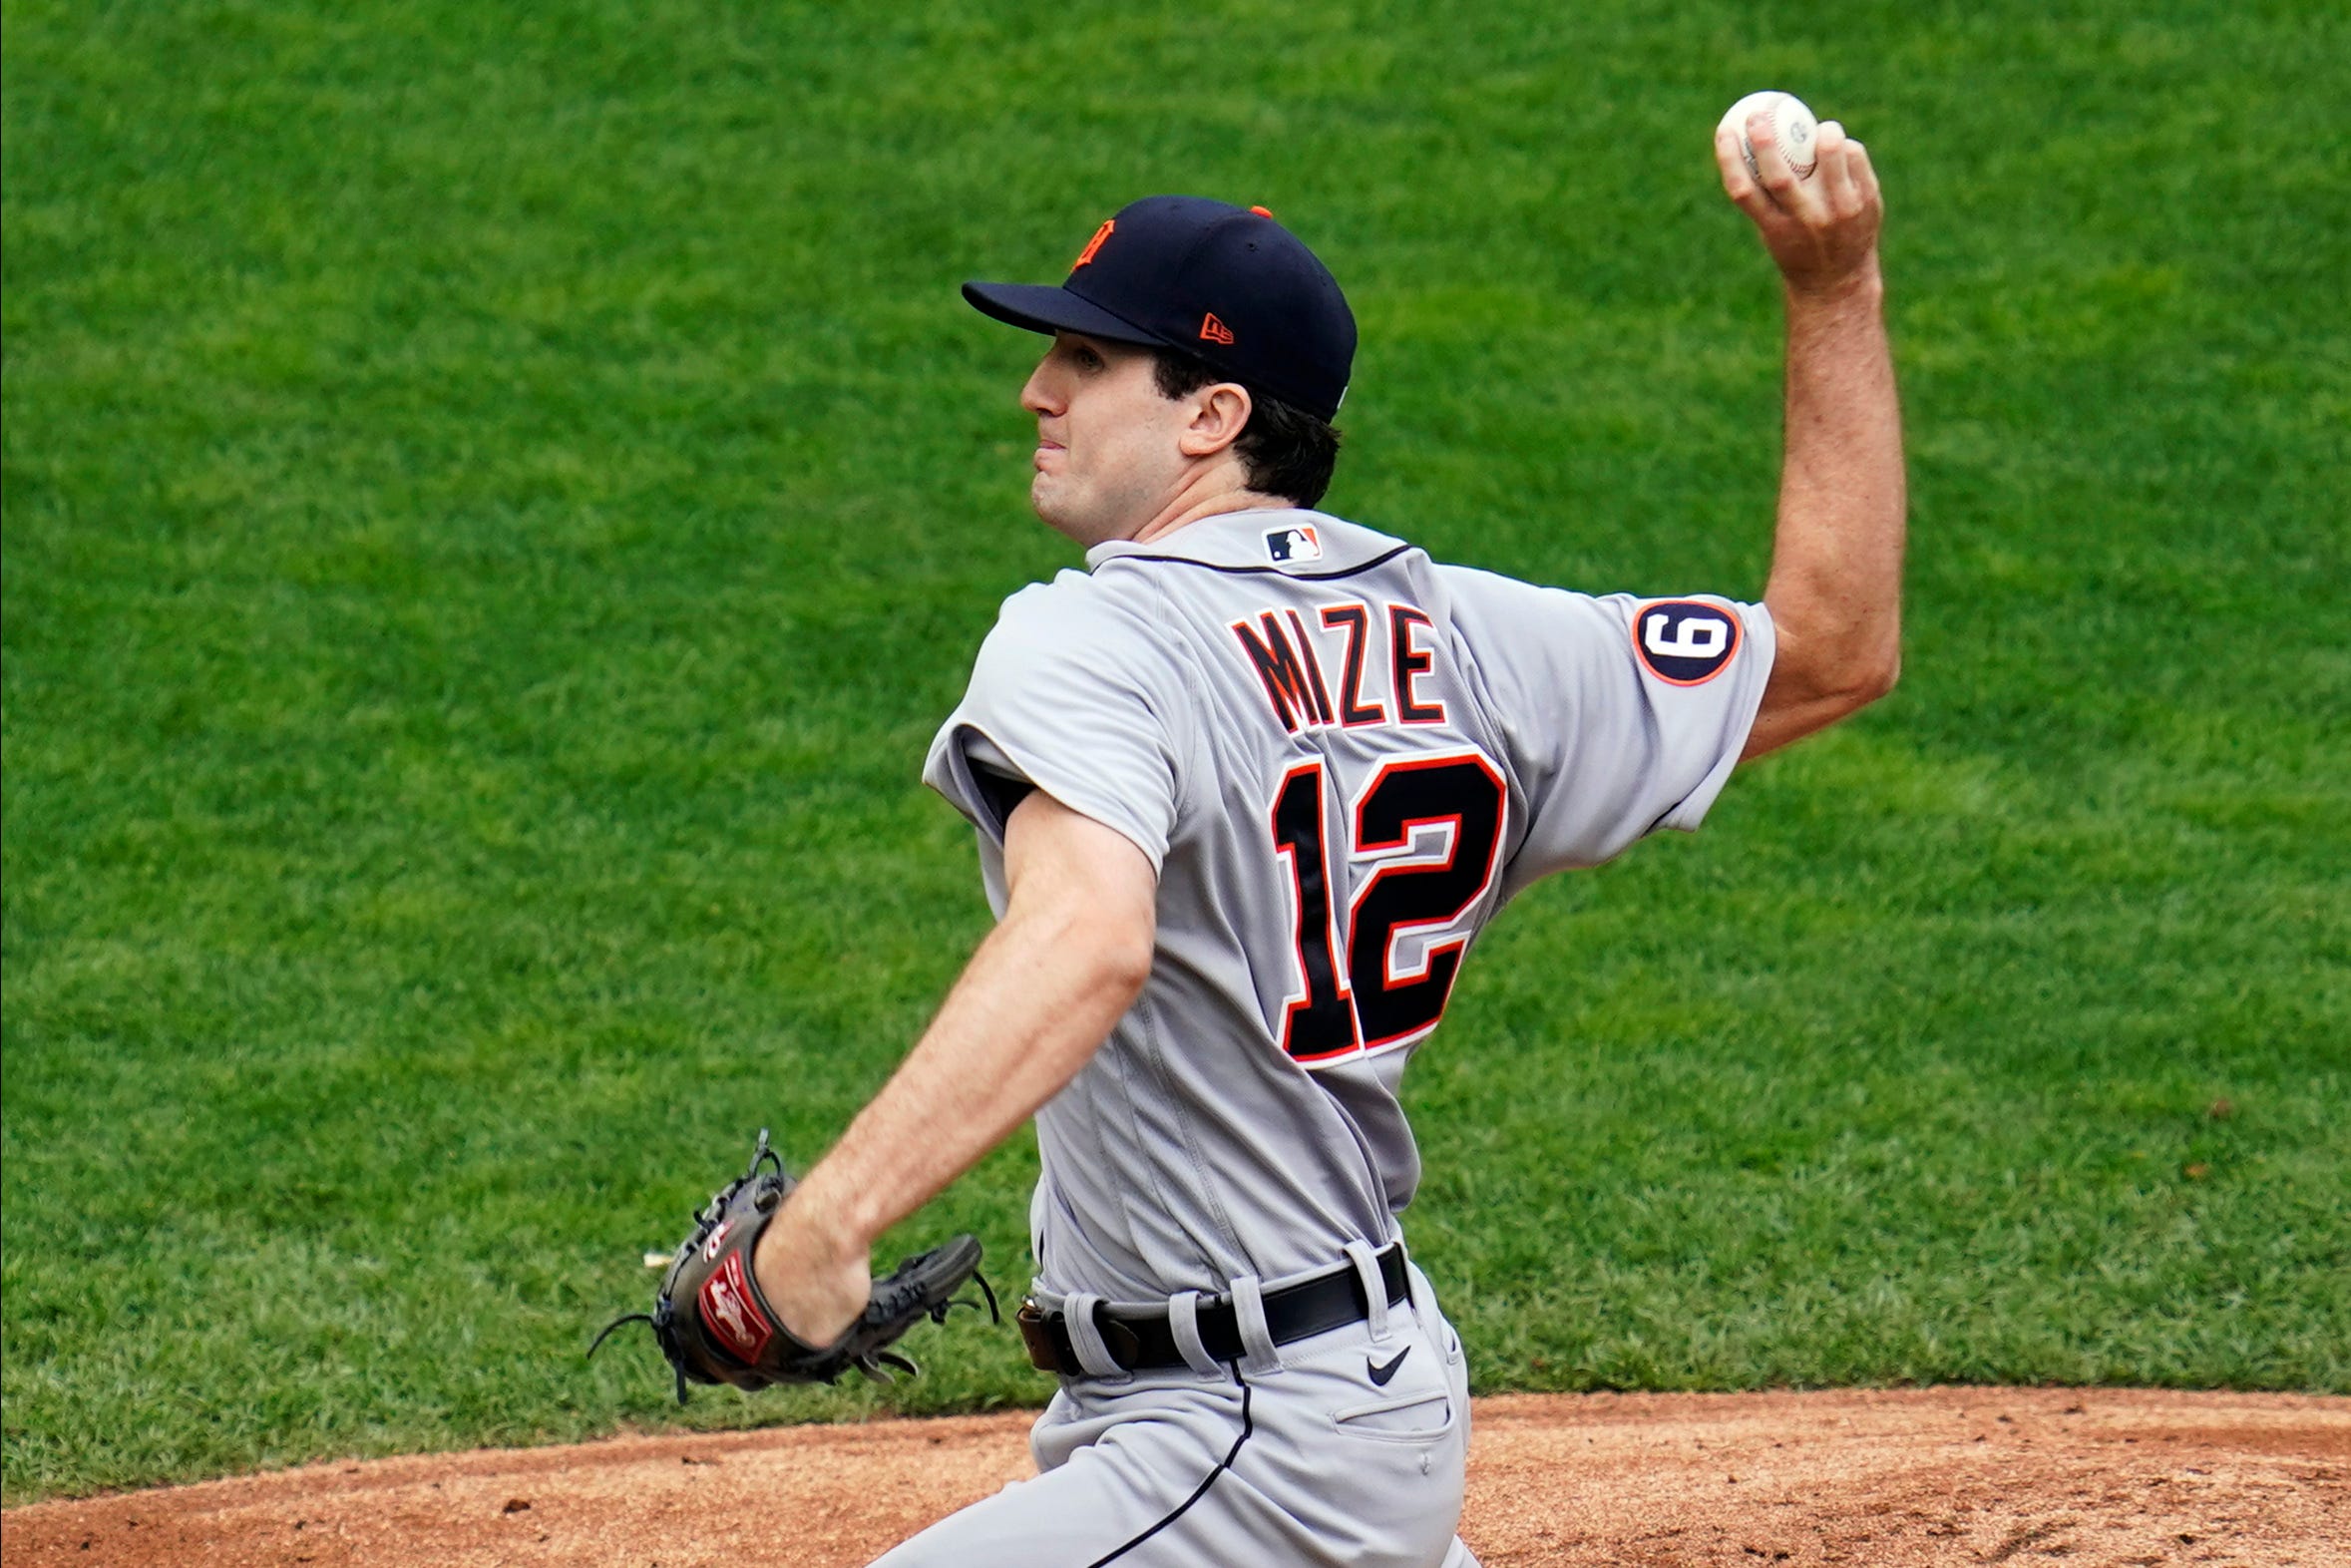 Detroit Tigers' pitcher Casey Mize throws against the Minnesota Twins in the first inning of a baseball game Sunday, Sept. 6, 2020, in Minneapolis.